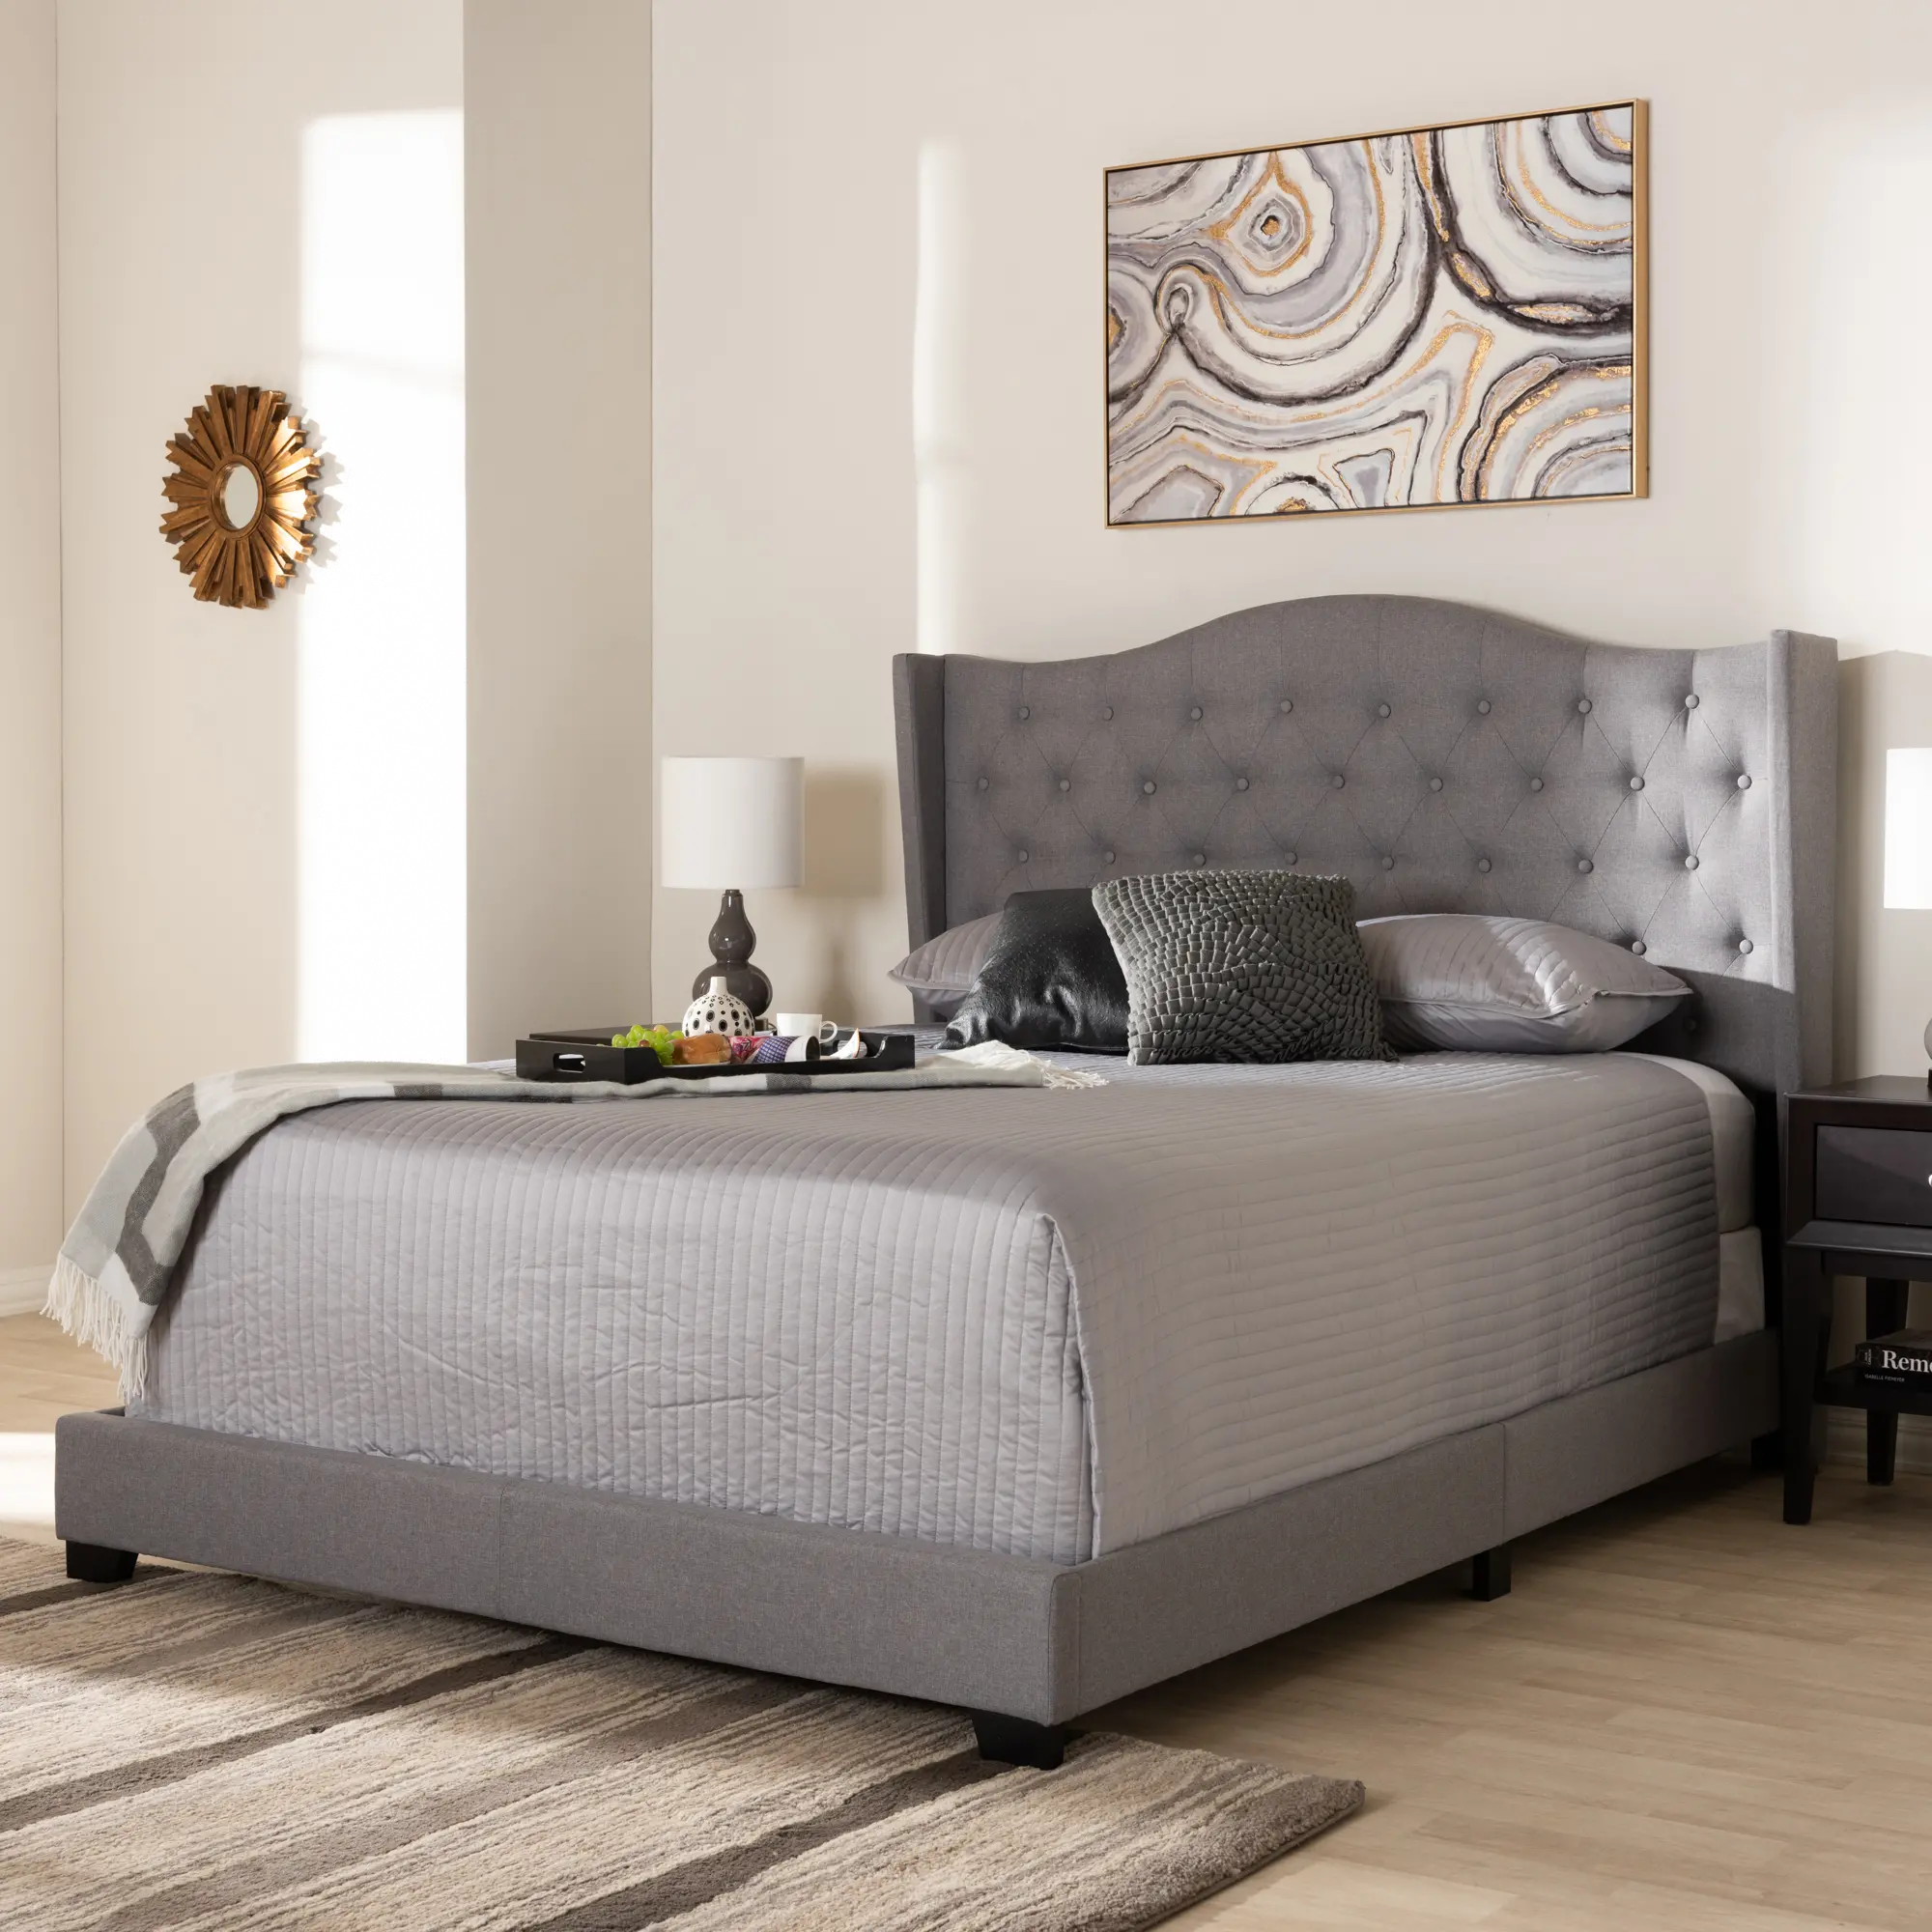 149-8930-RCW Contemporary Light Gray Upholstered Queen Bed - Na sku 149-8930-RCW